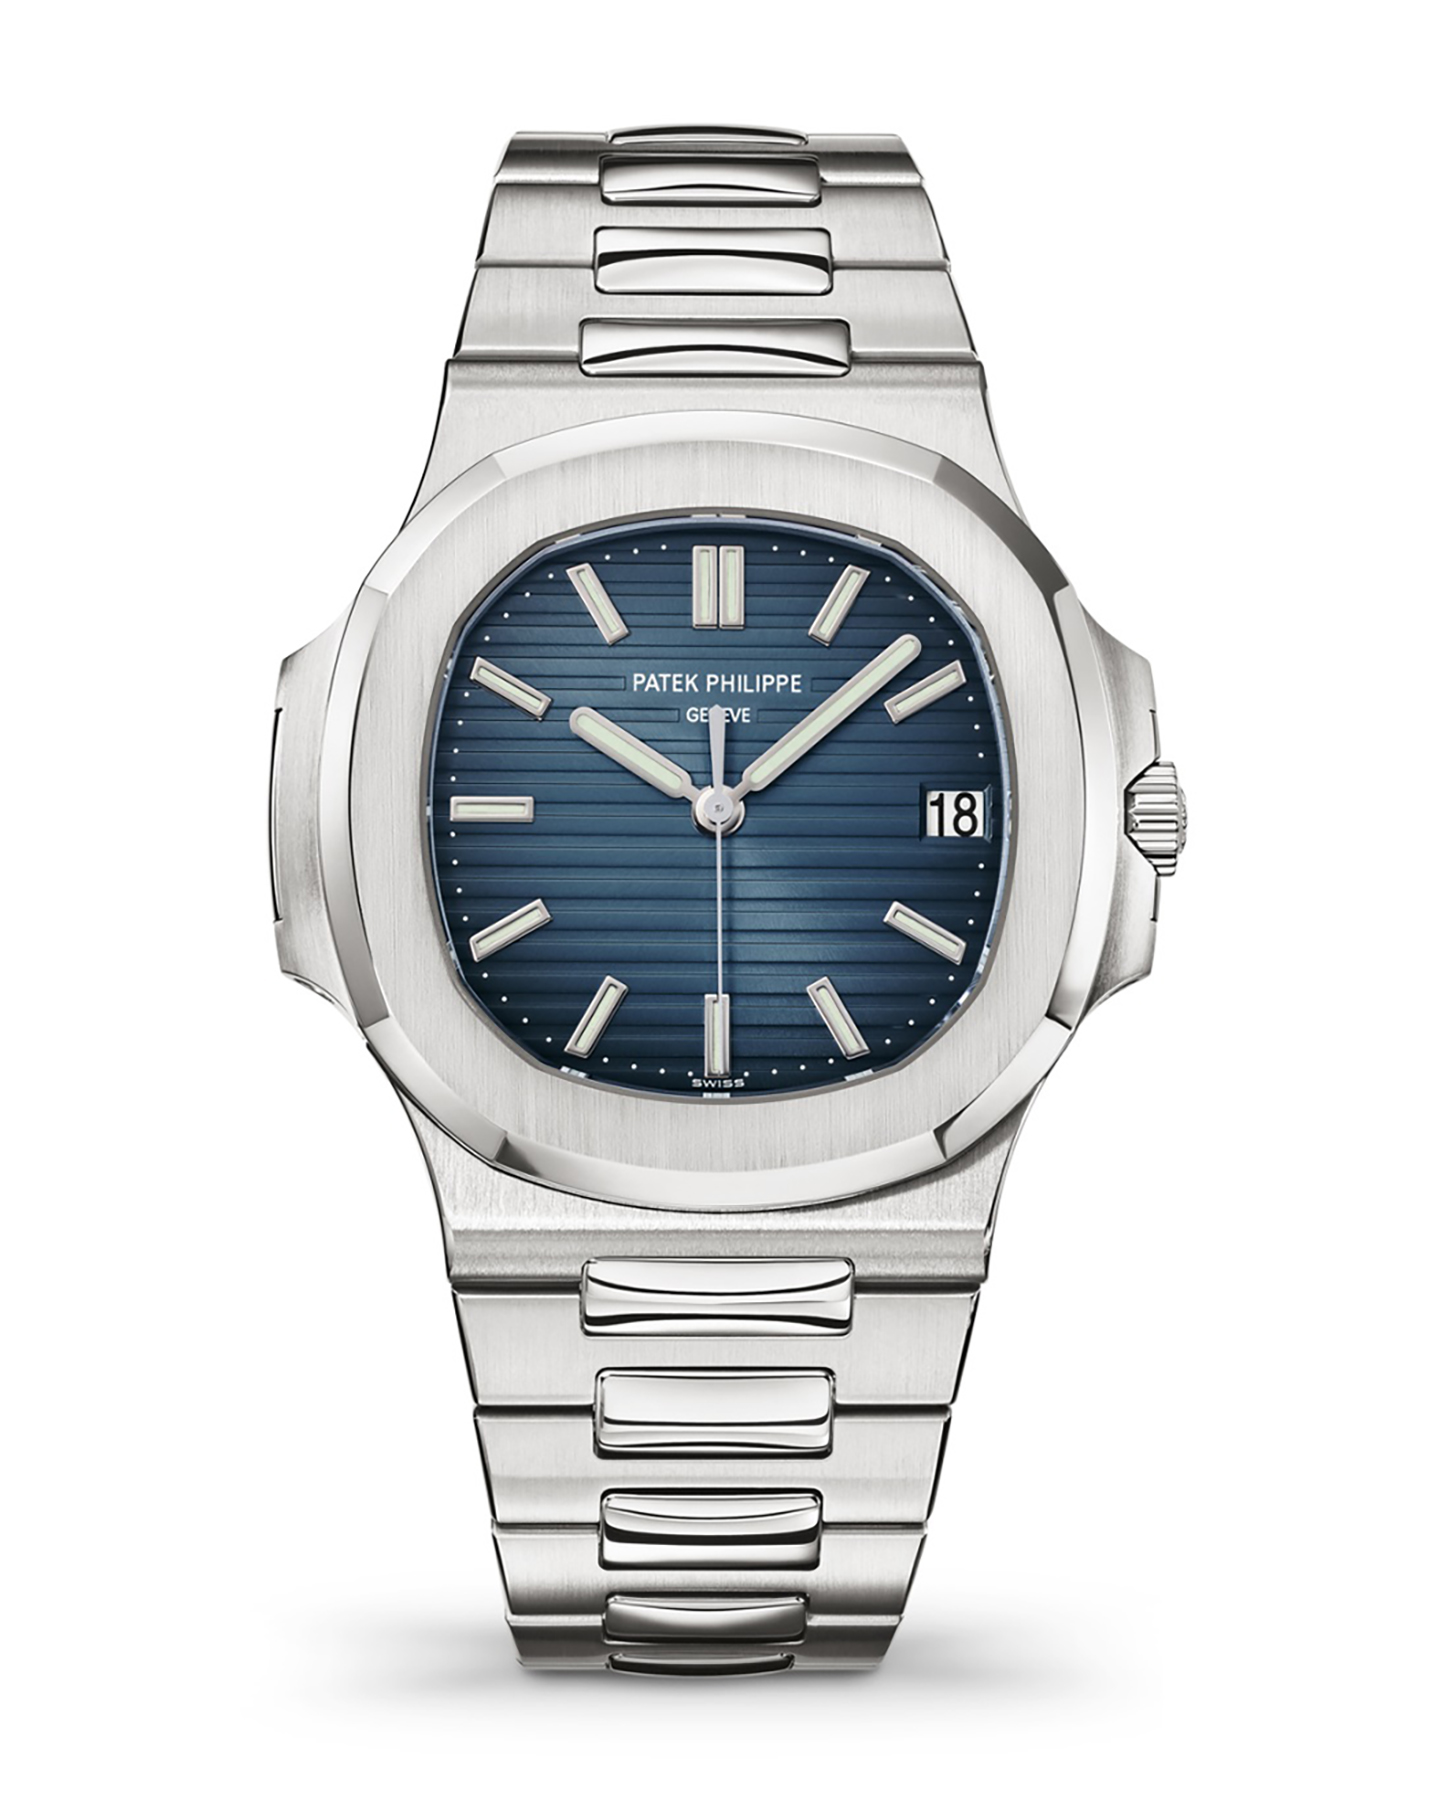 Investment Value: Understanding the Long-Term Benefits of Patek Philippe Ownership